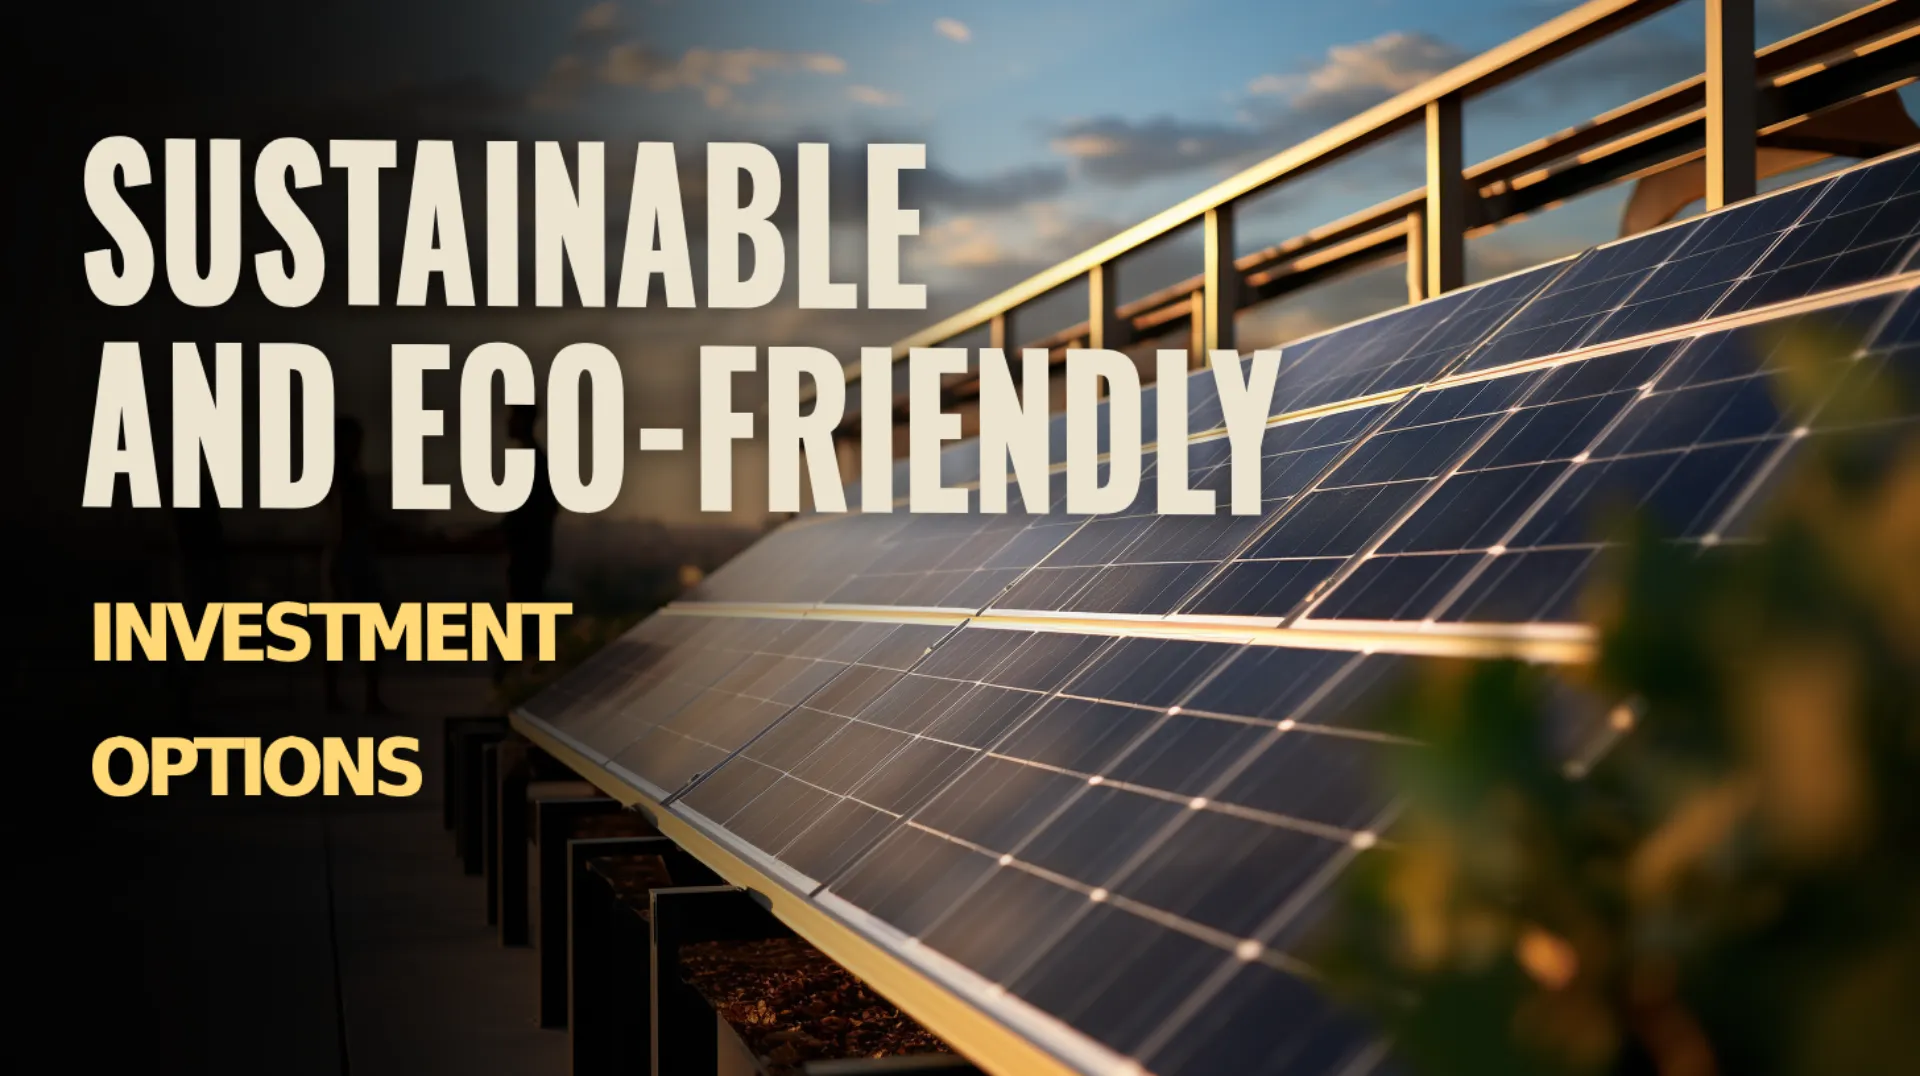 Visual Guide to Eco-Friendly Investment Options: This image provides insights into diverse eco-friendly investment avenues, promoting a greener and more sustainable future